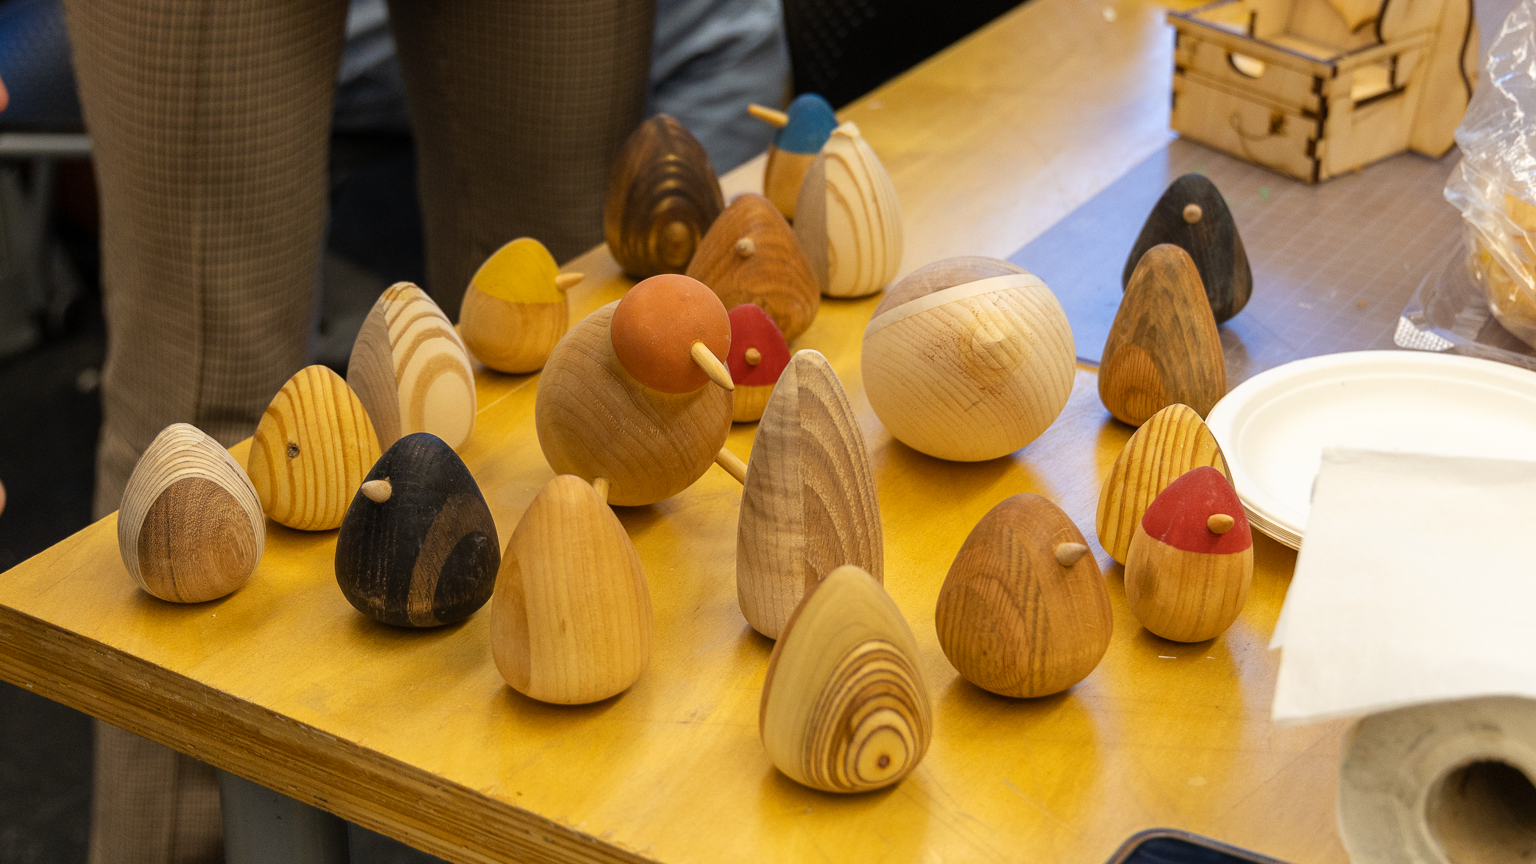 Wooden birds and eggs in different sizes and colors